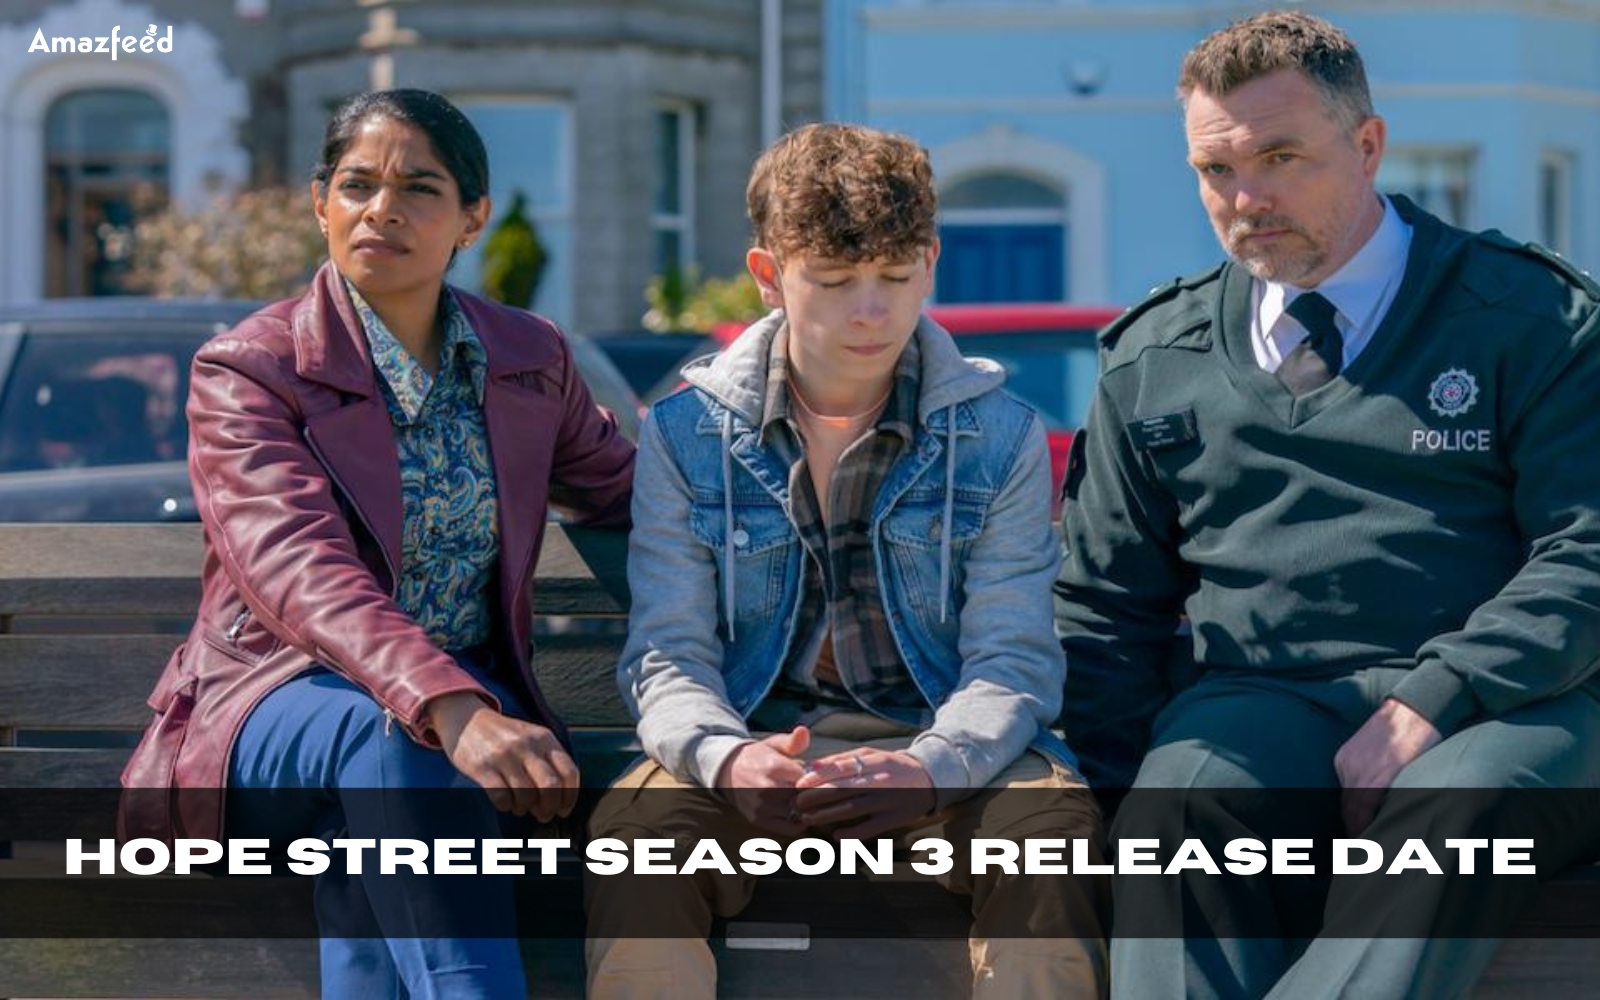 When Will Hope Street Season 3 Be Released? Everything we know so far